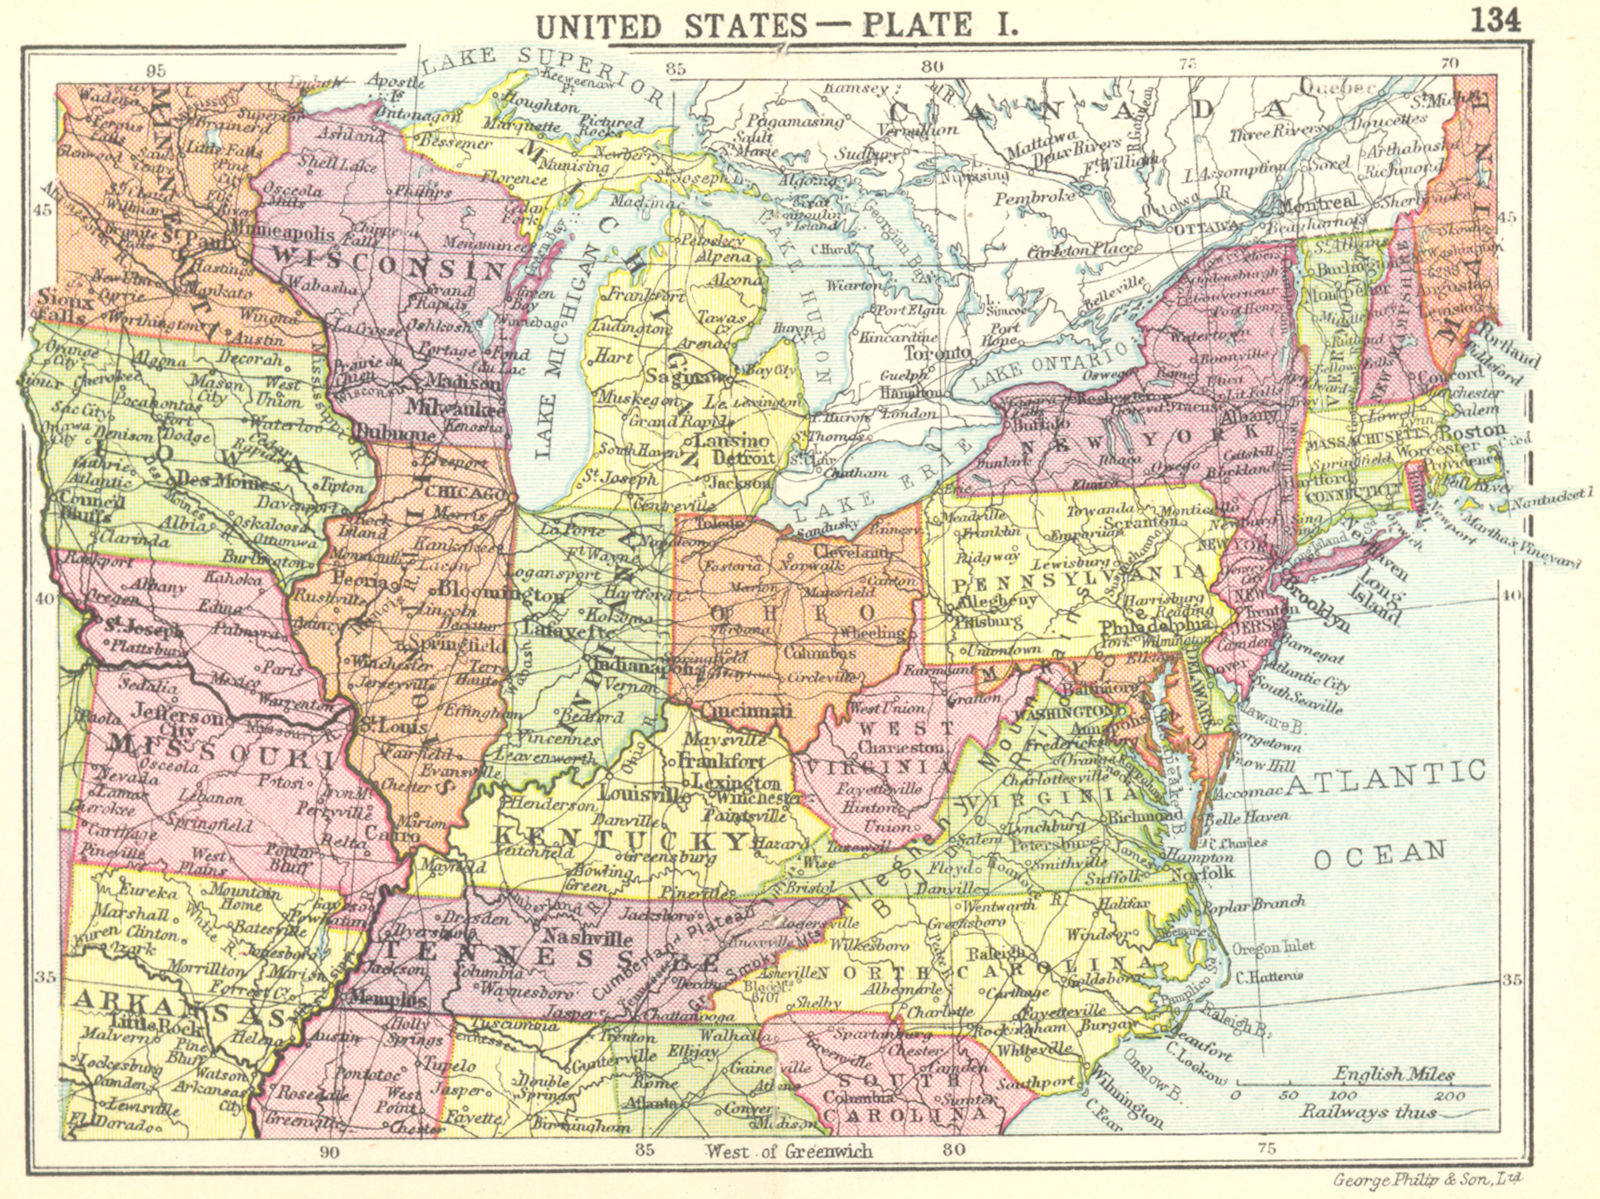 Associate Product USA. United States-Plate I; Small map 1912 old antique vintage plan chart